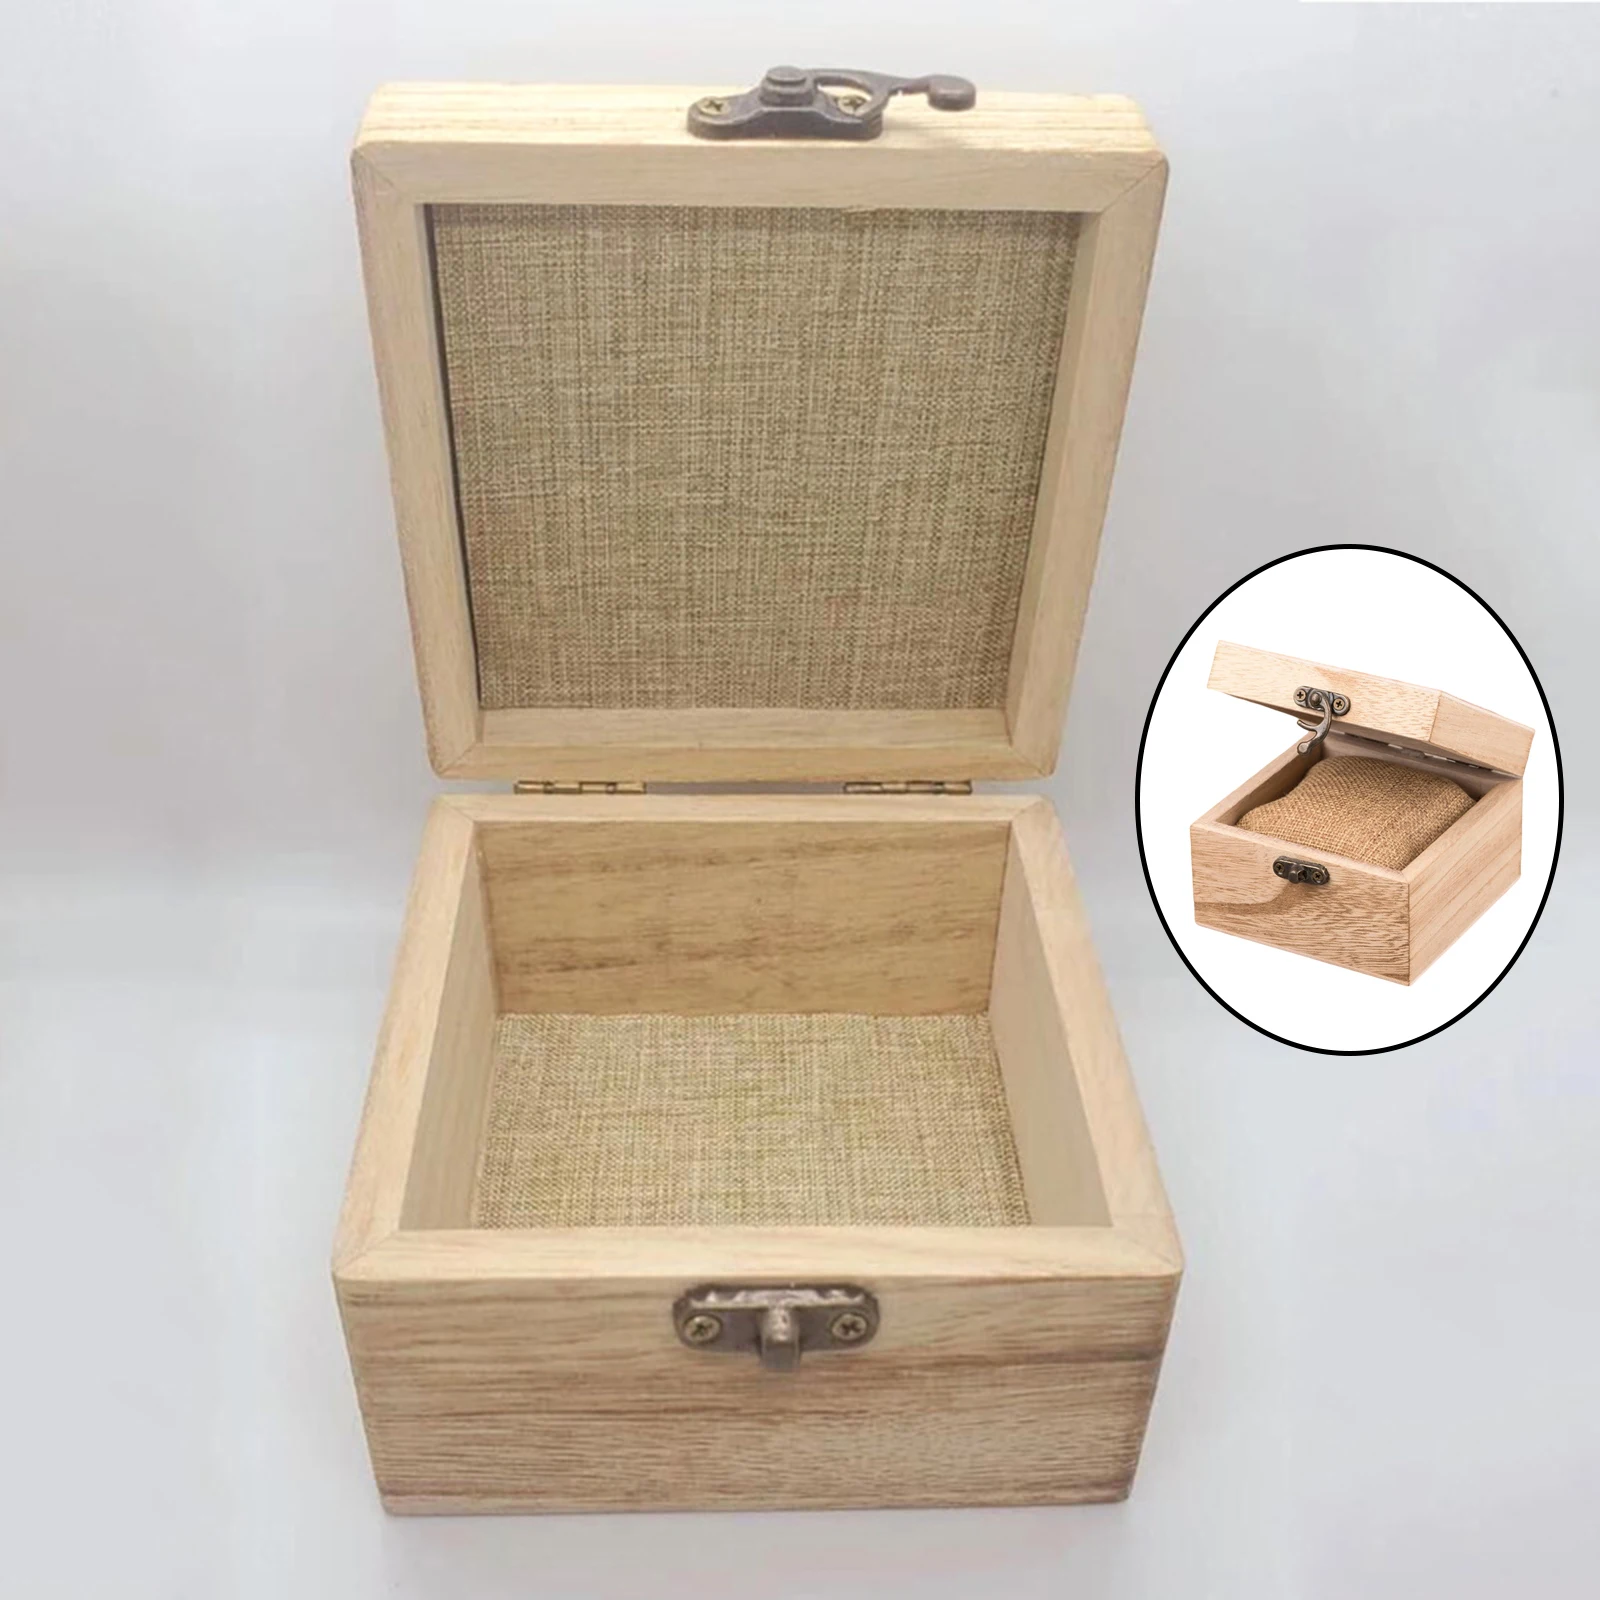 Travel DIY Unpainted Wooden Watch Case Jewelry Box Packing Box